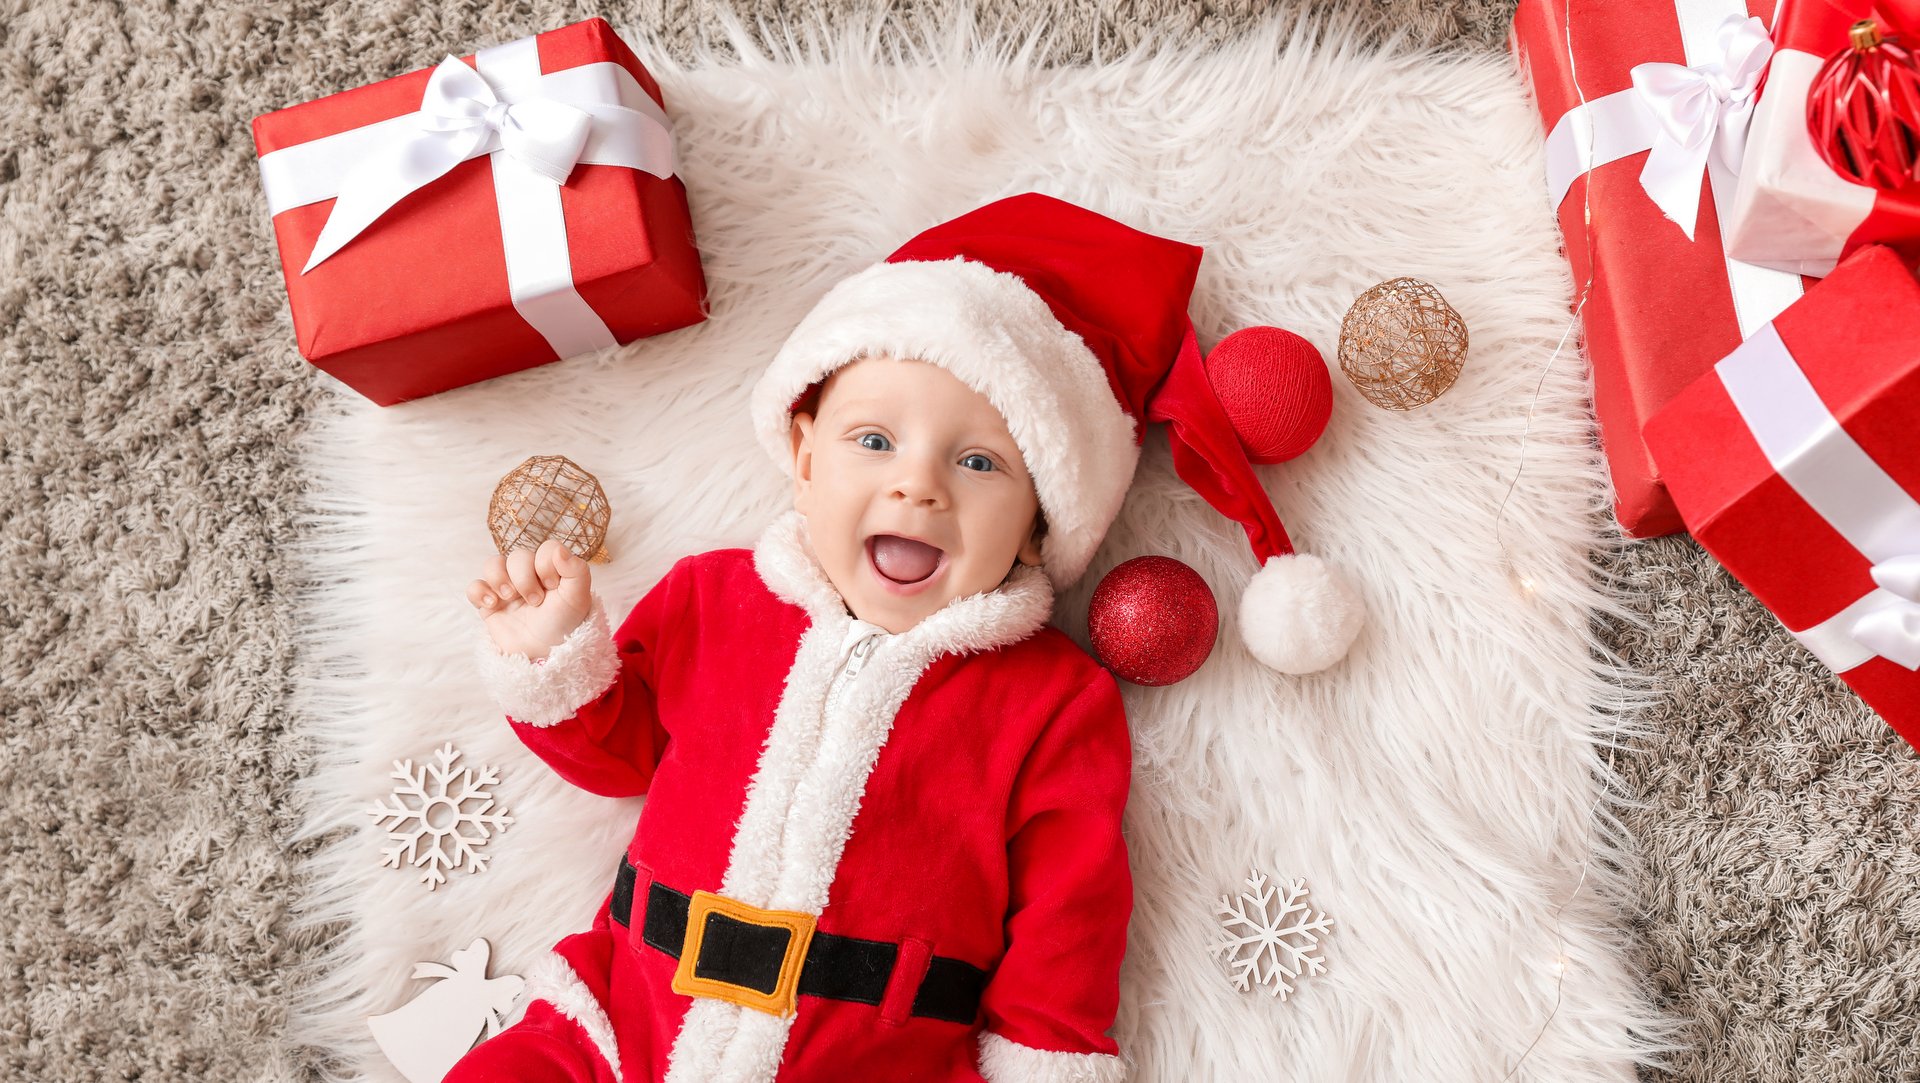 Cute little baby smiling in Santa Claus costume and with Christmas gift boxes